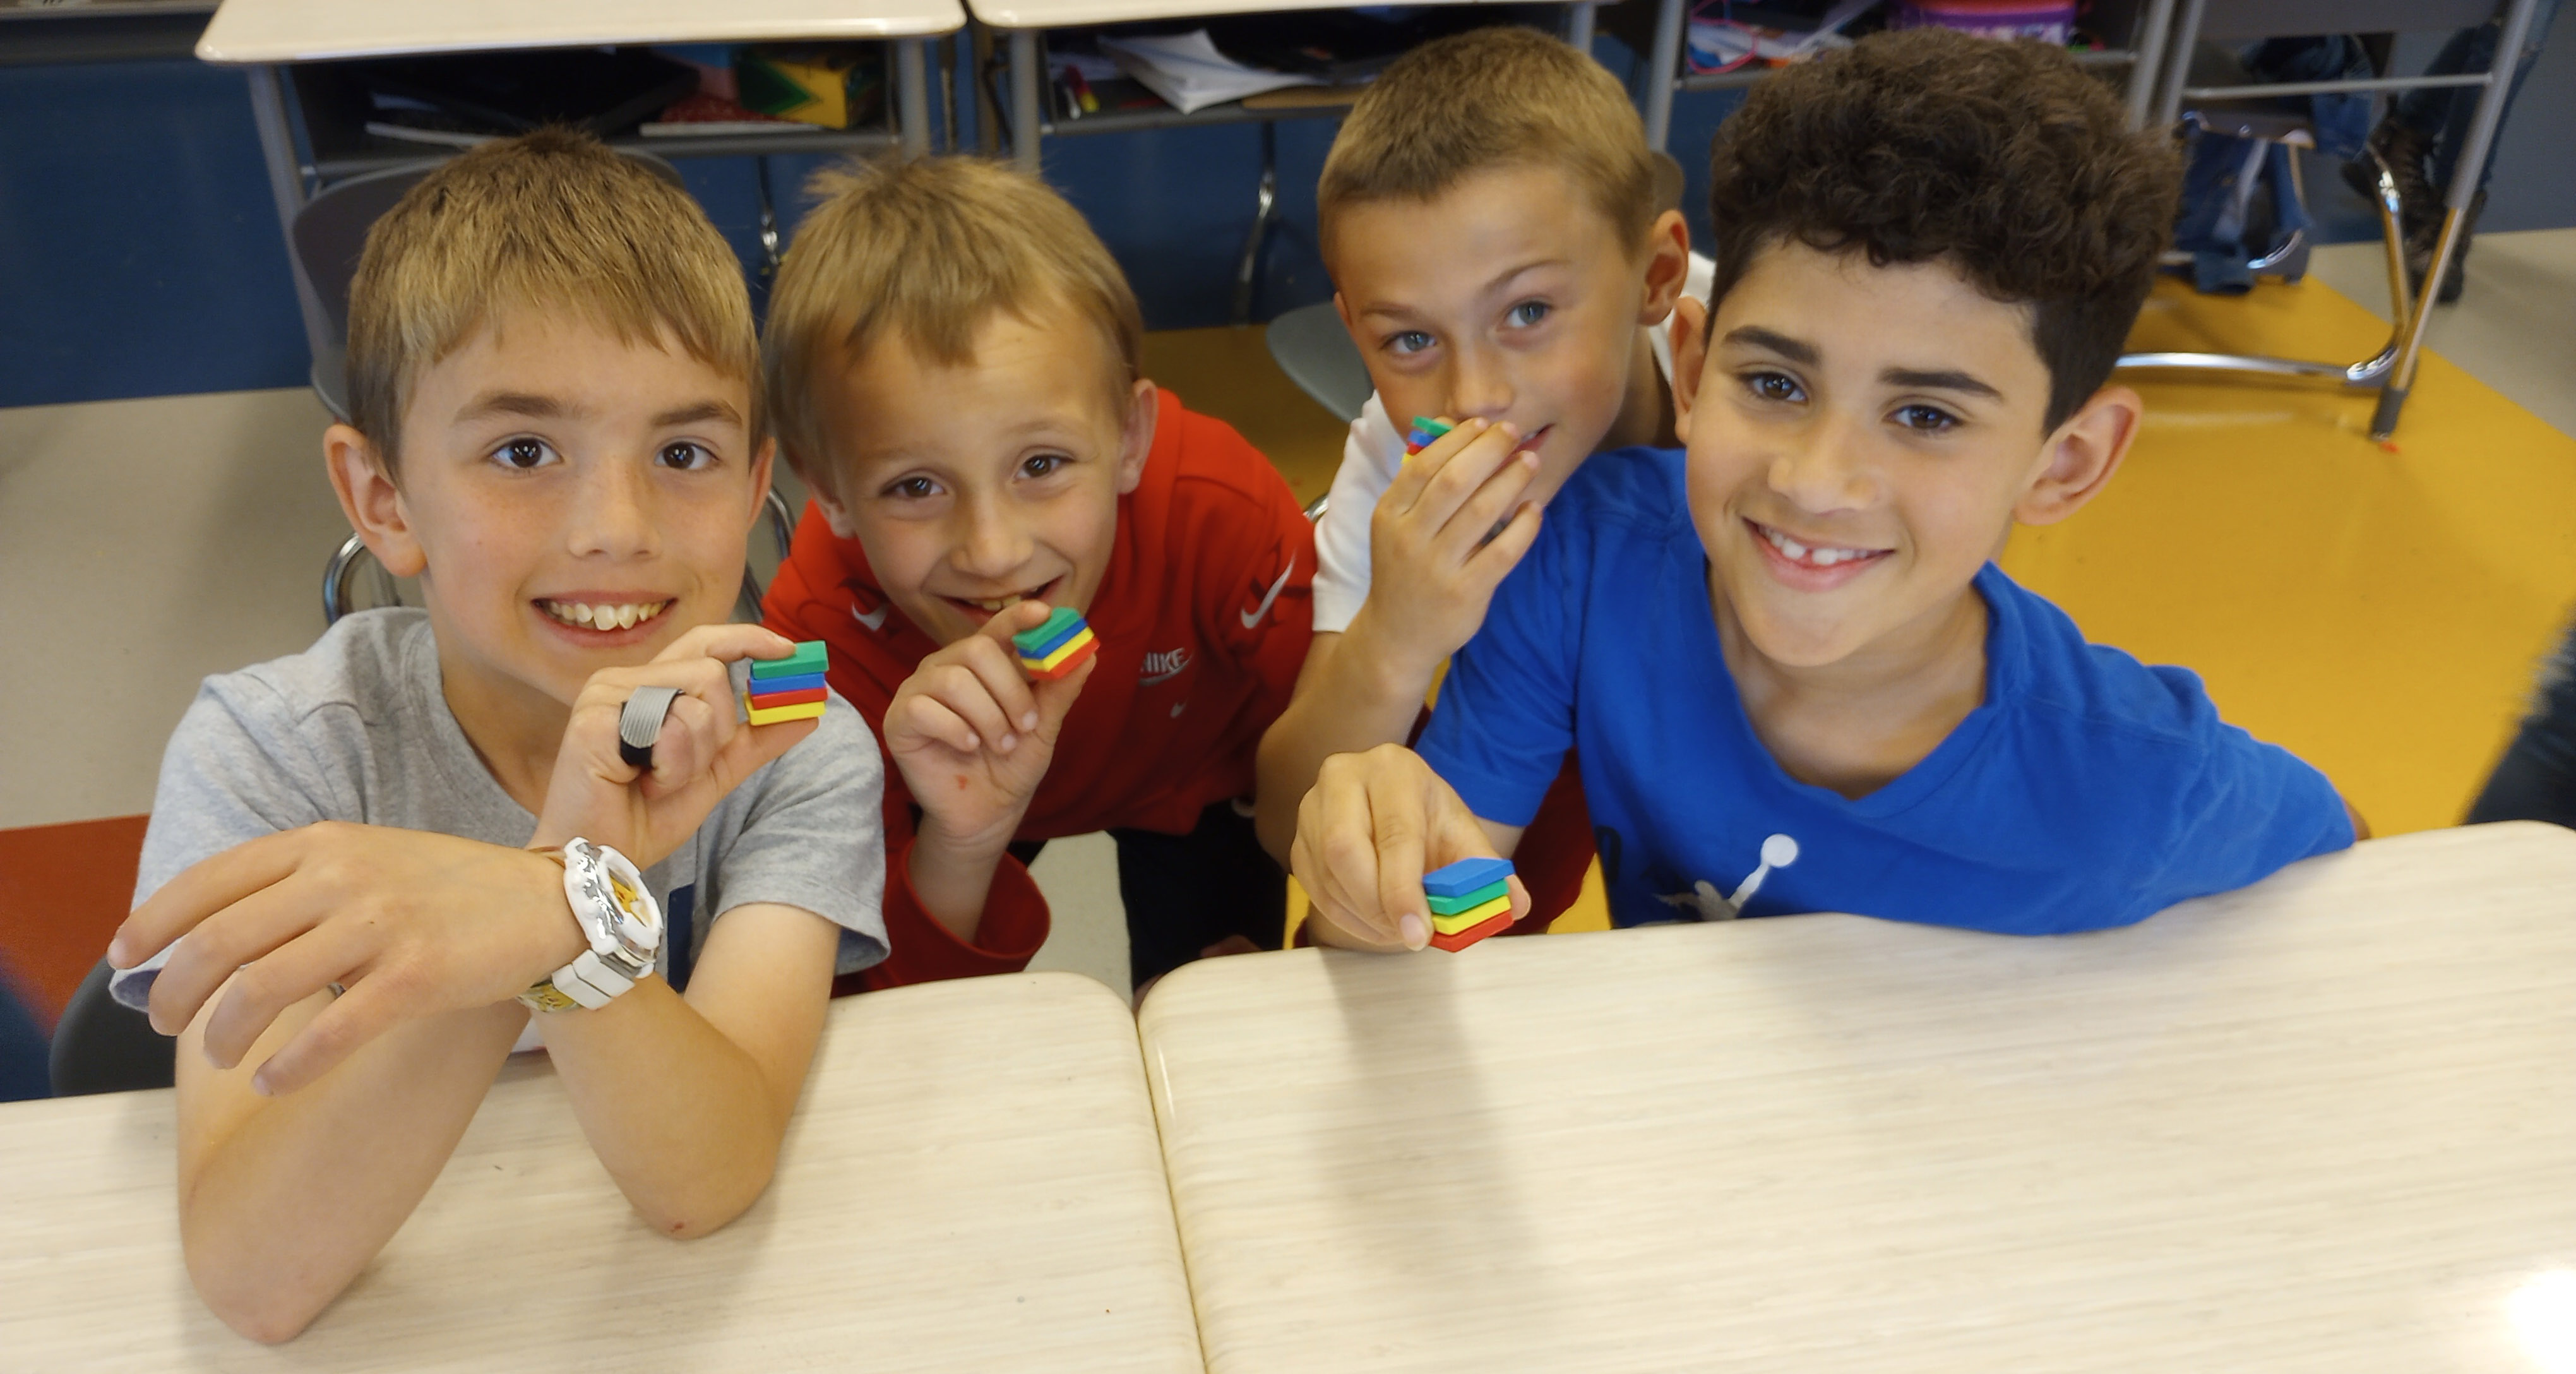 Four boys in class holding plastic squares in their hands